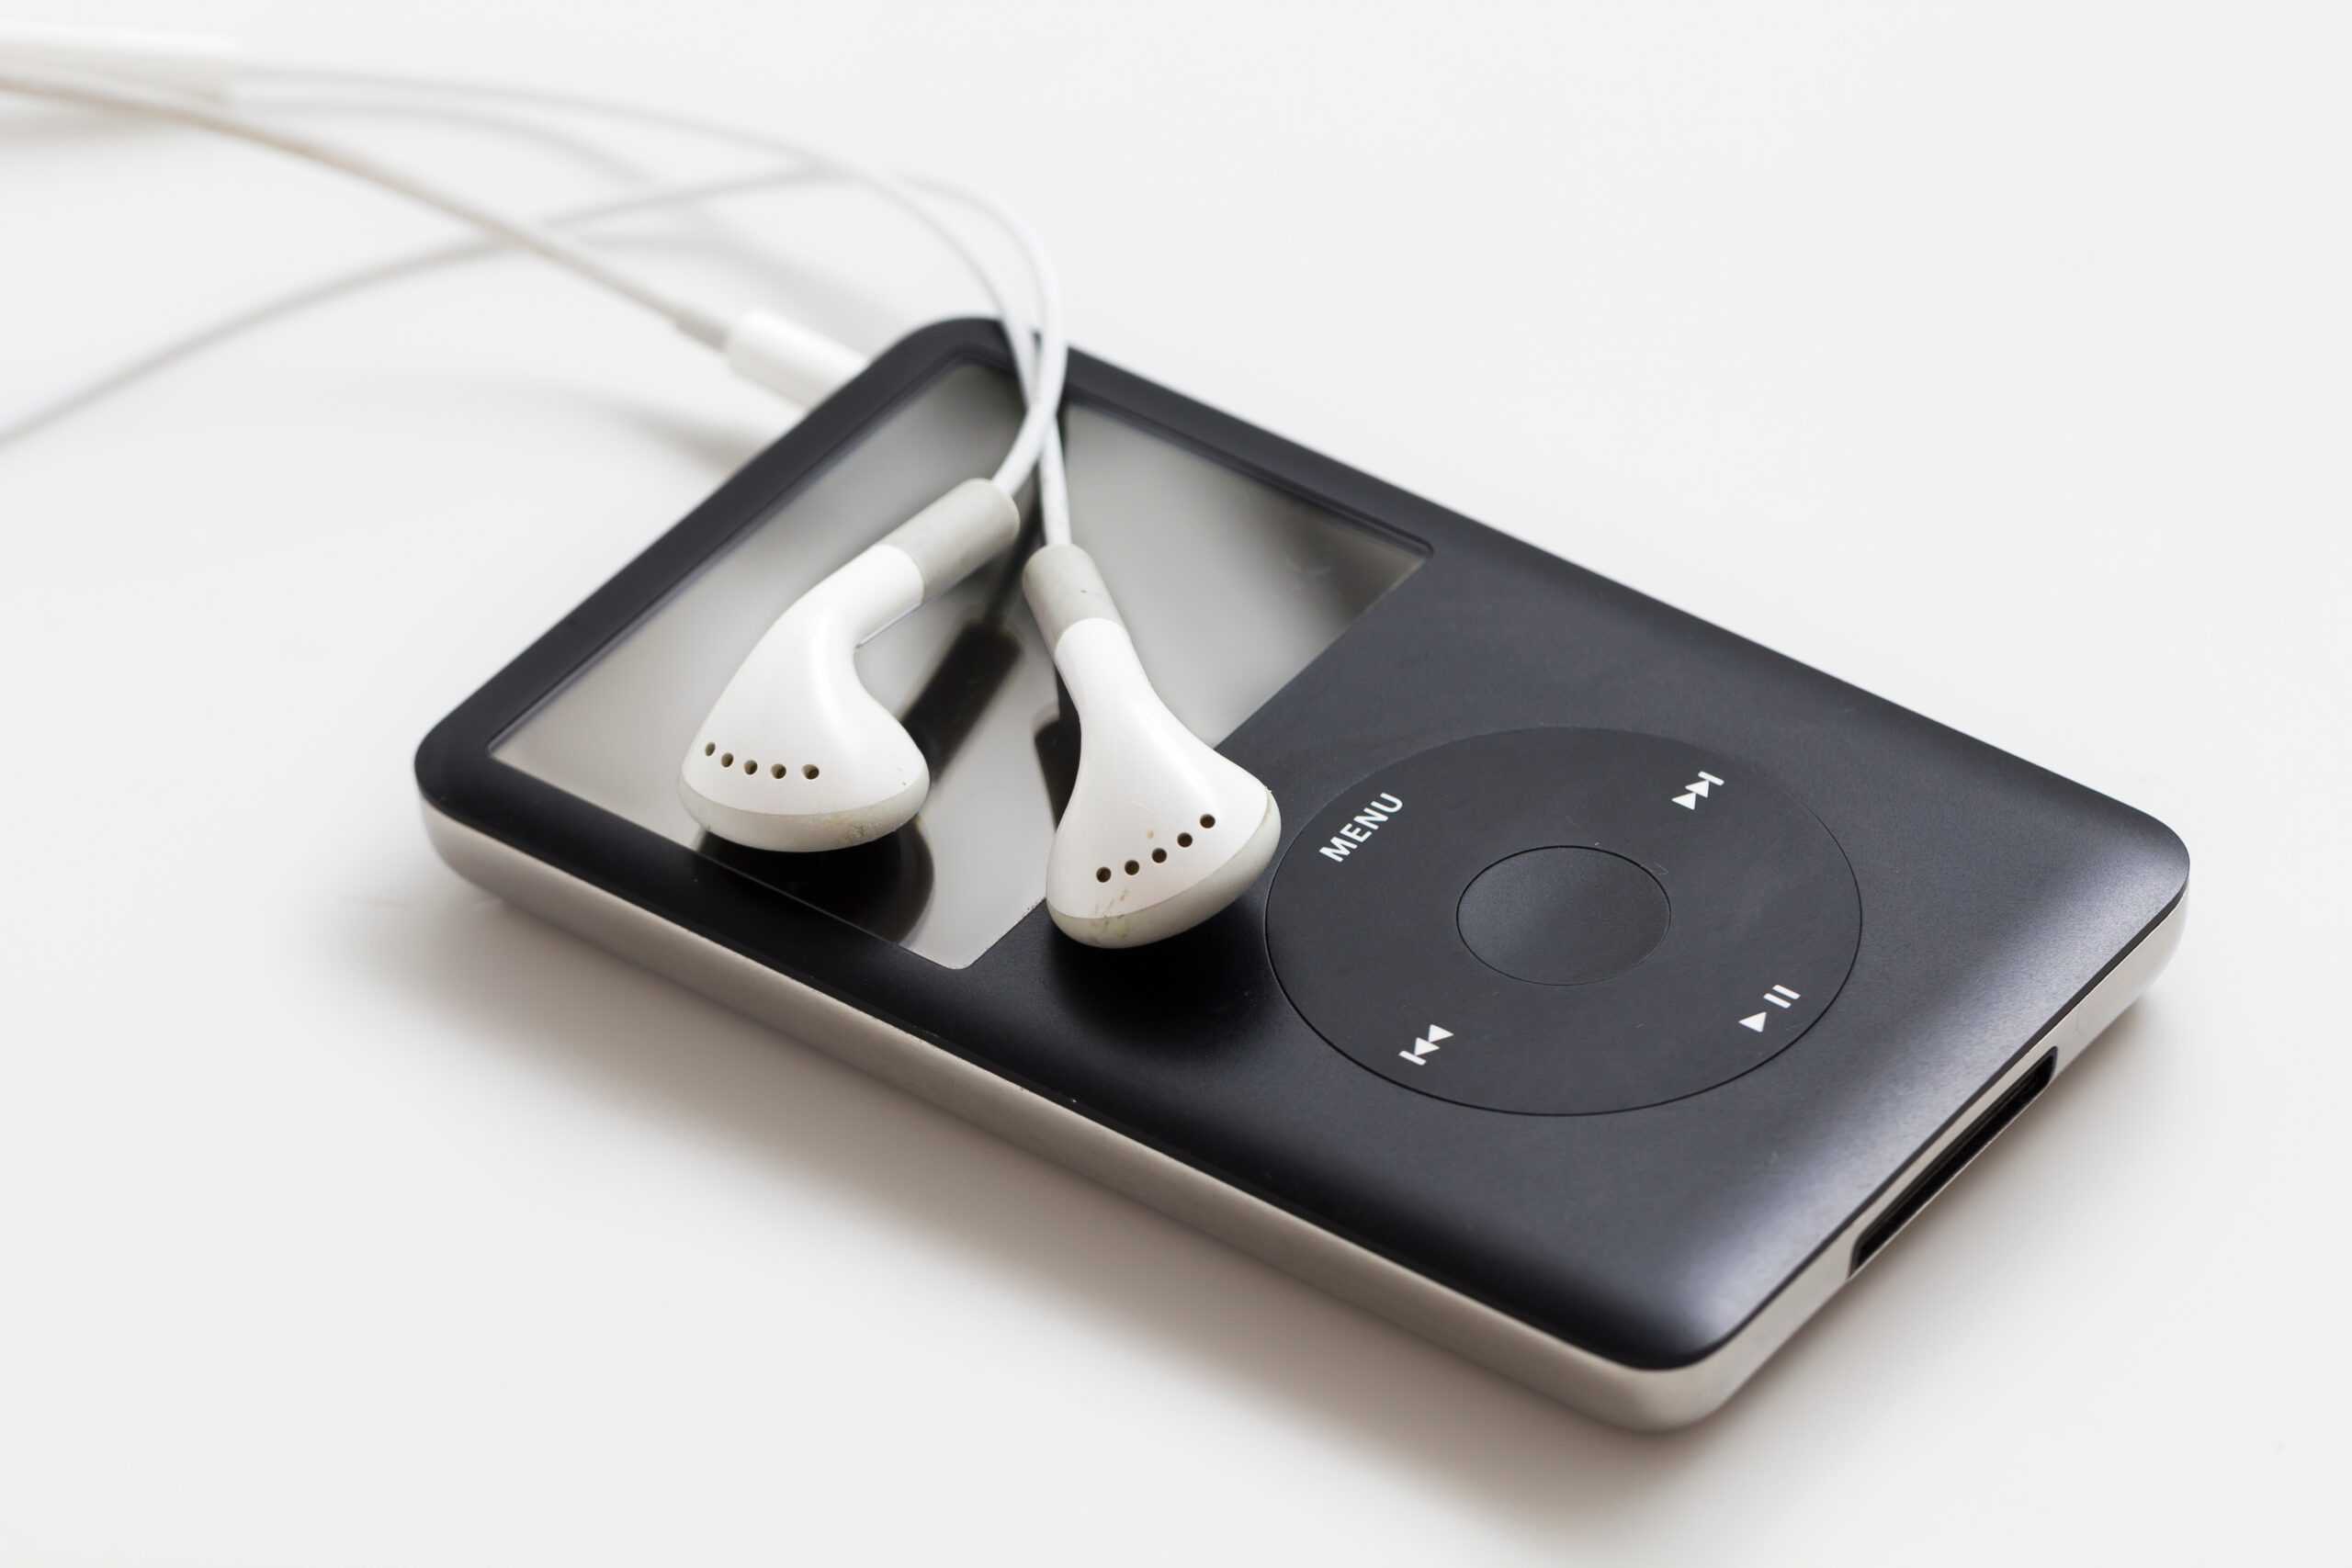 Apple finally retires the iPod after more than 20 fruitful years